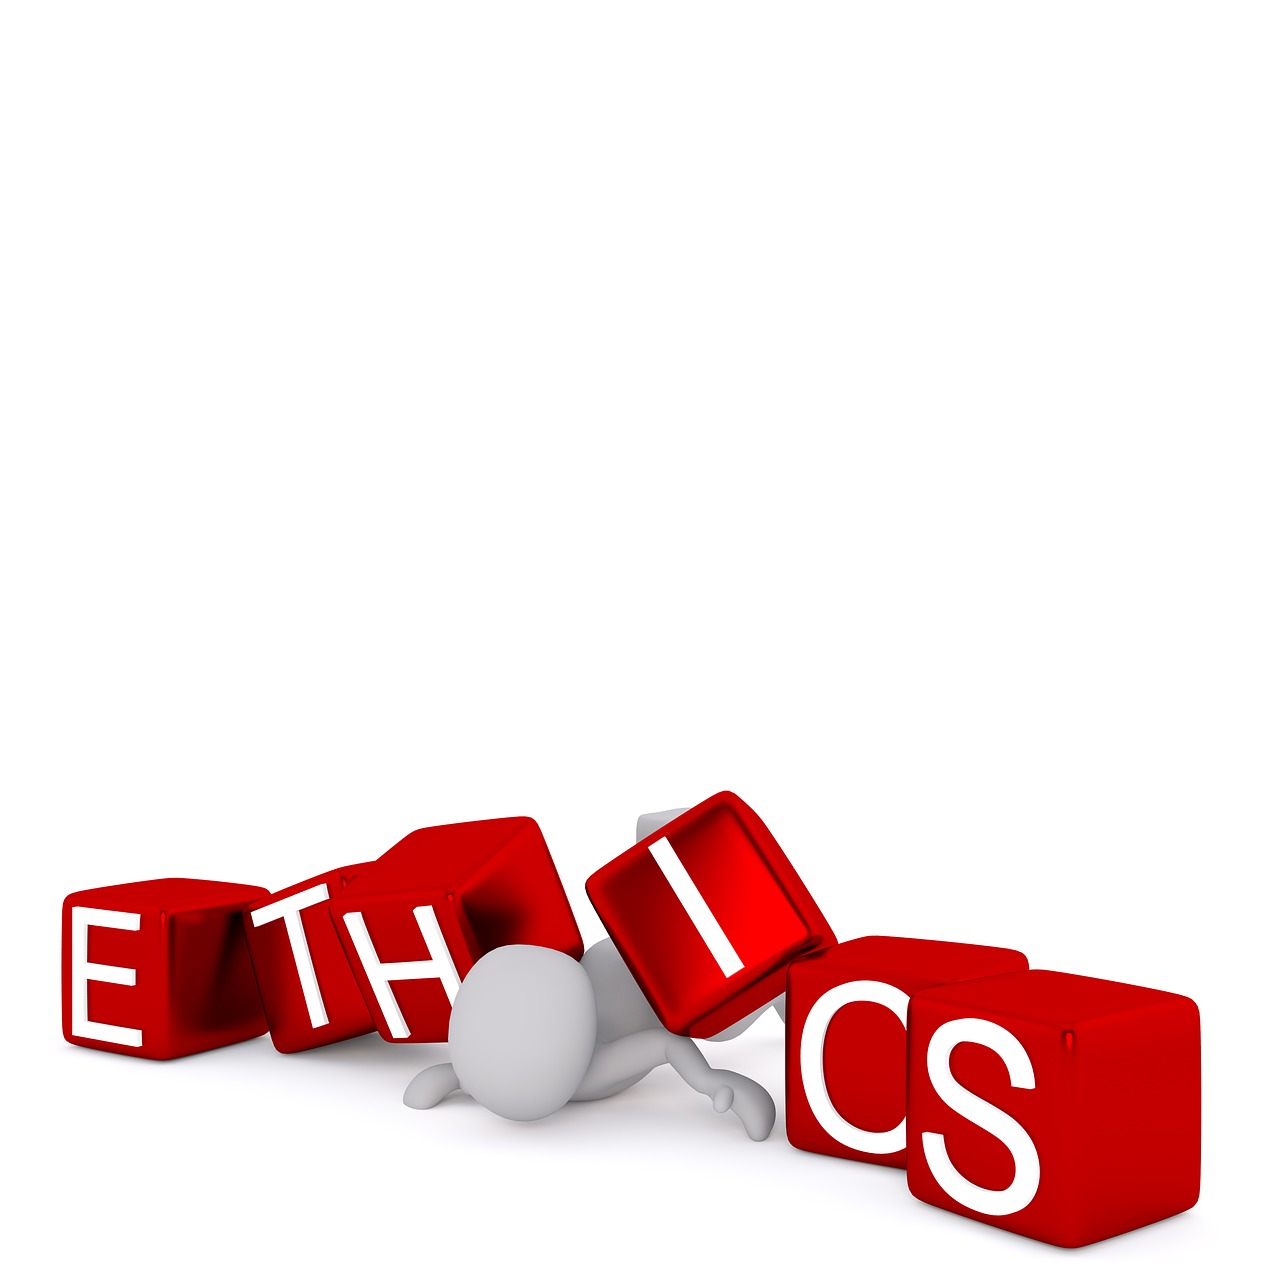 Leading with Integrity and Ethics